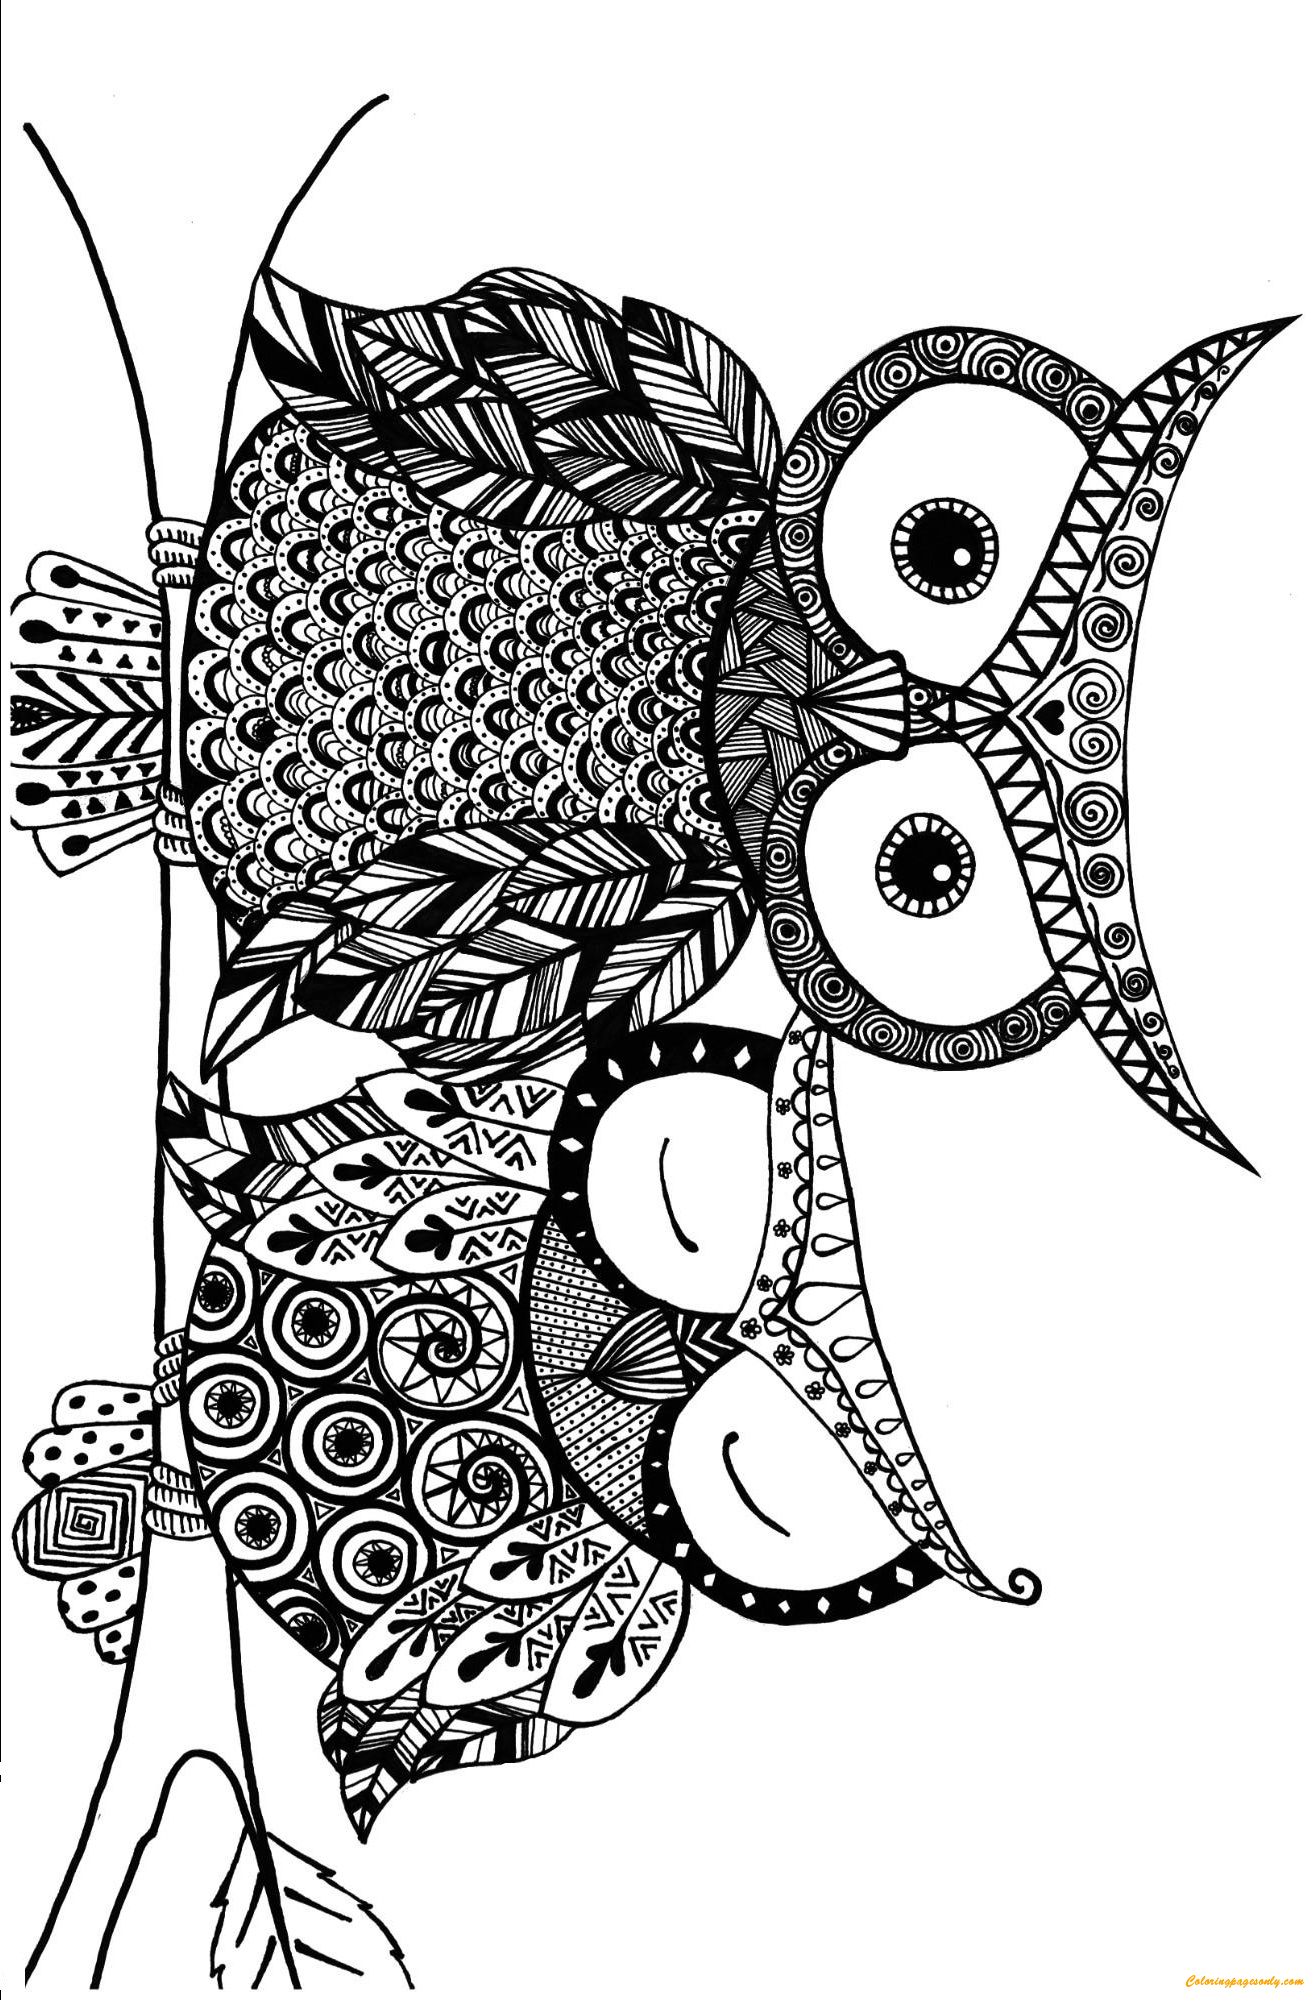 Creative Owls Coloring Pages   Hard Coloring Pages   Free Printable ...